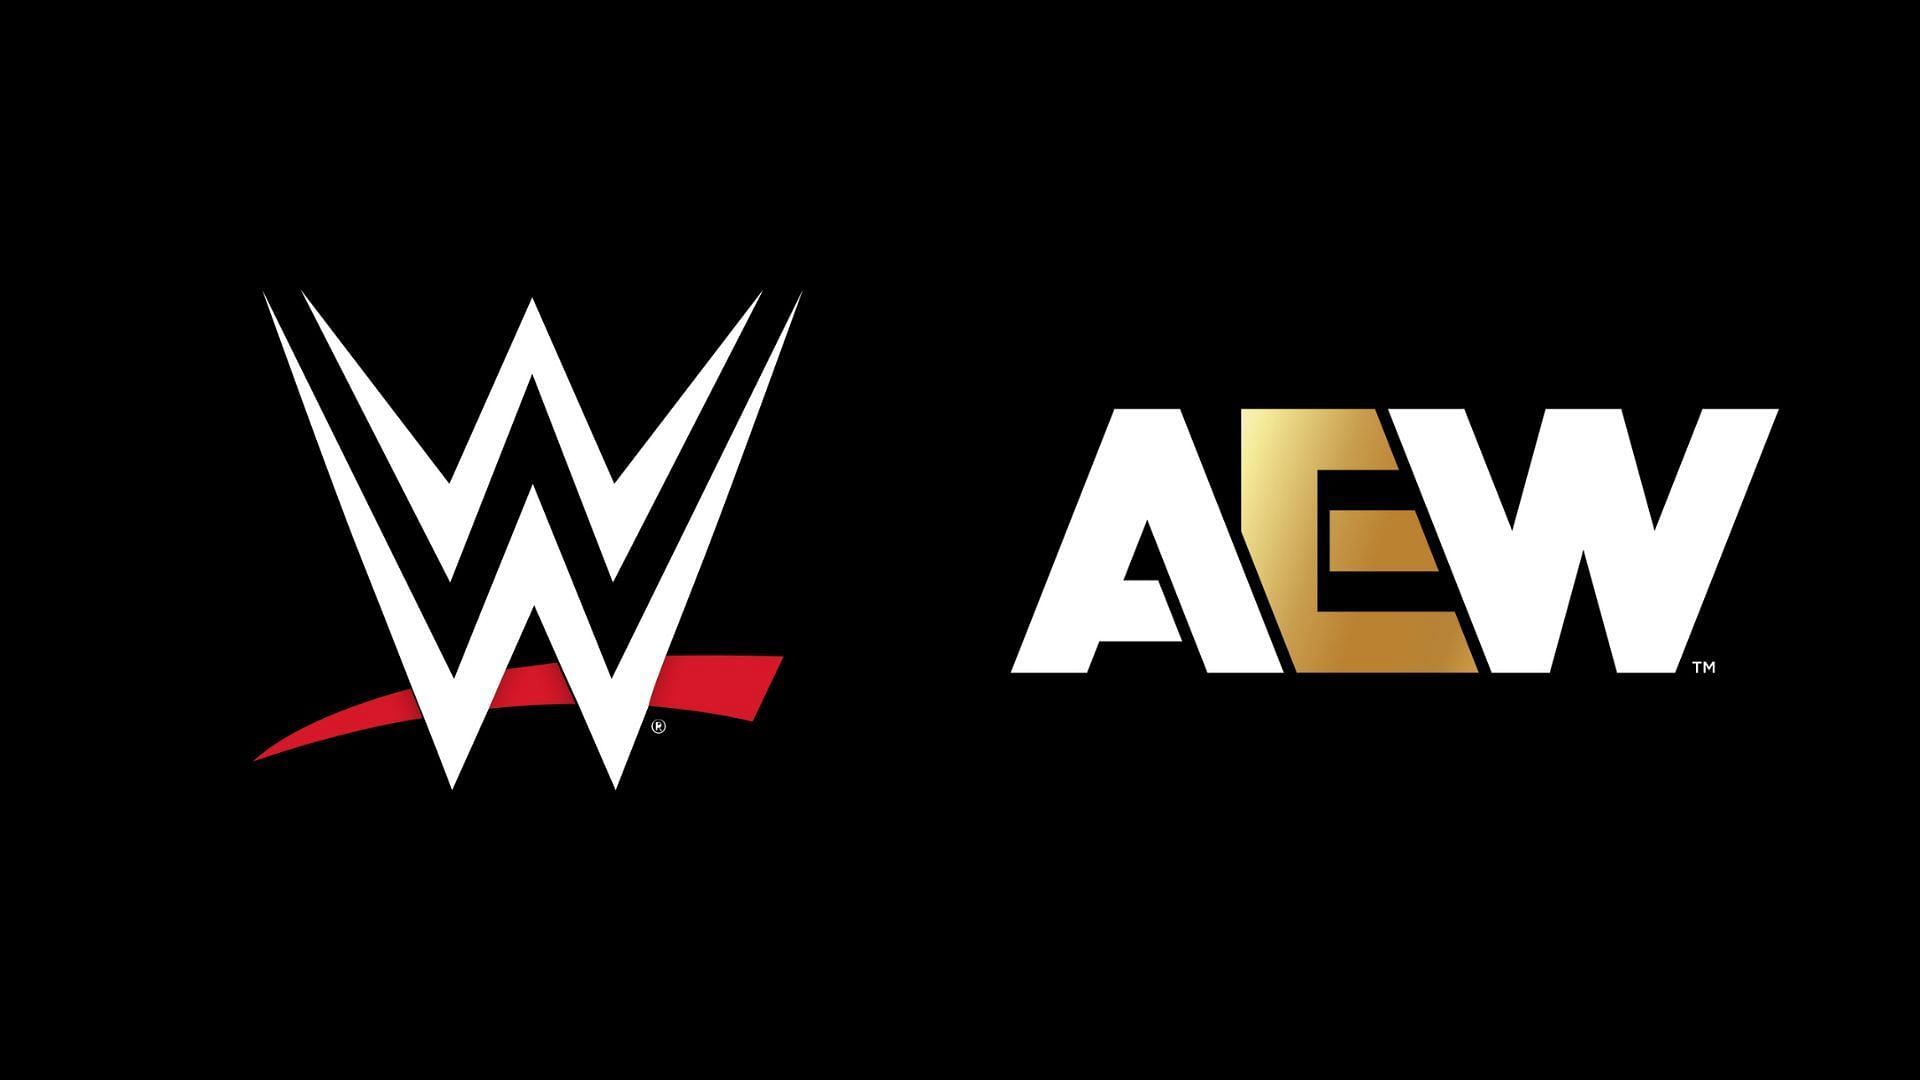 WWE and AEW are top players in the wrestling industry 